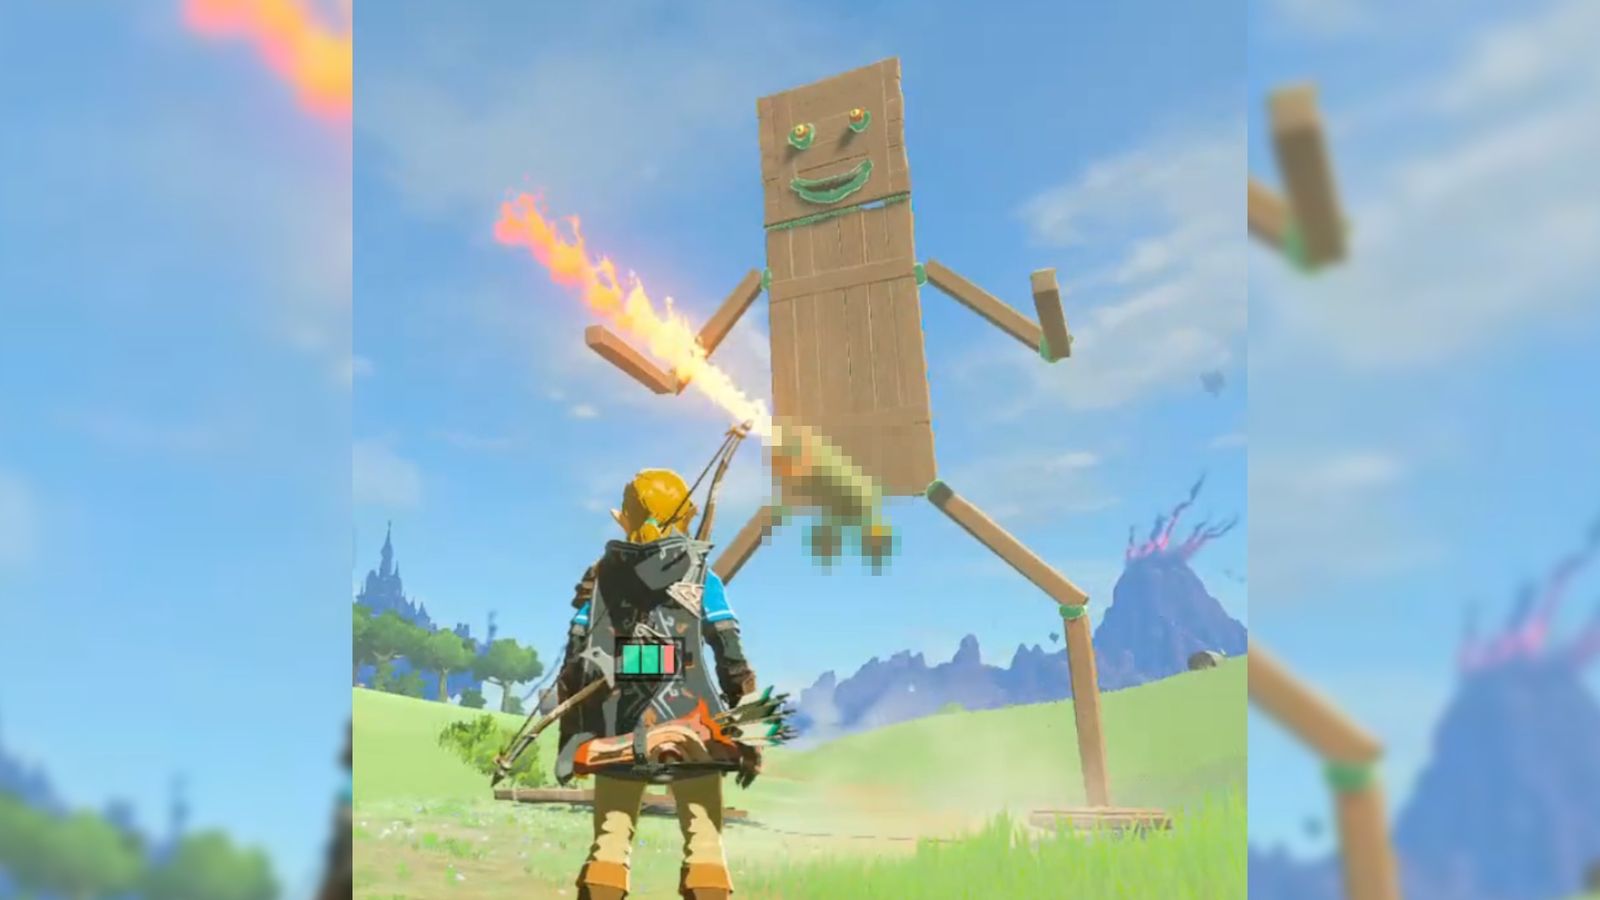 Link looking up at a big mech with a flamethrower for a groin. 